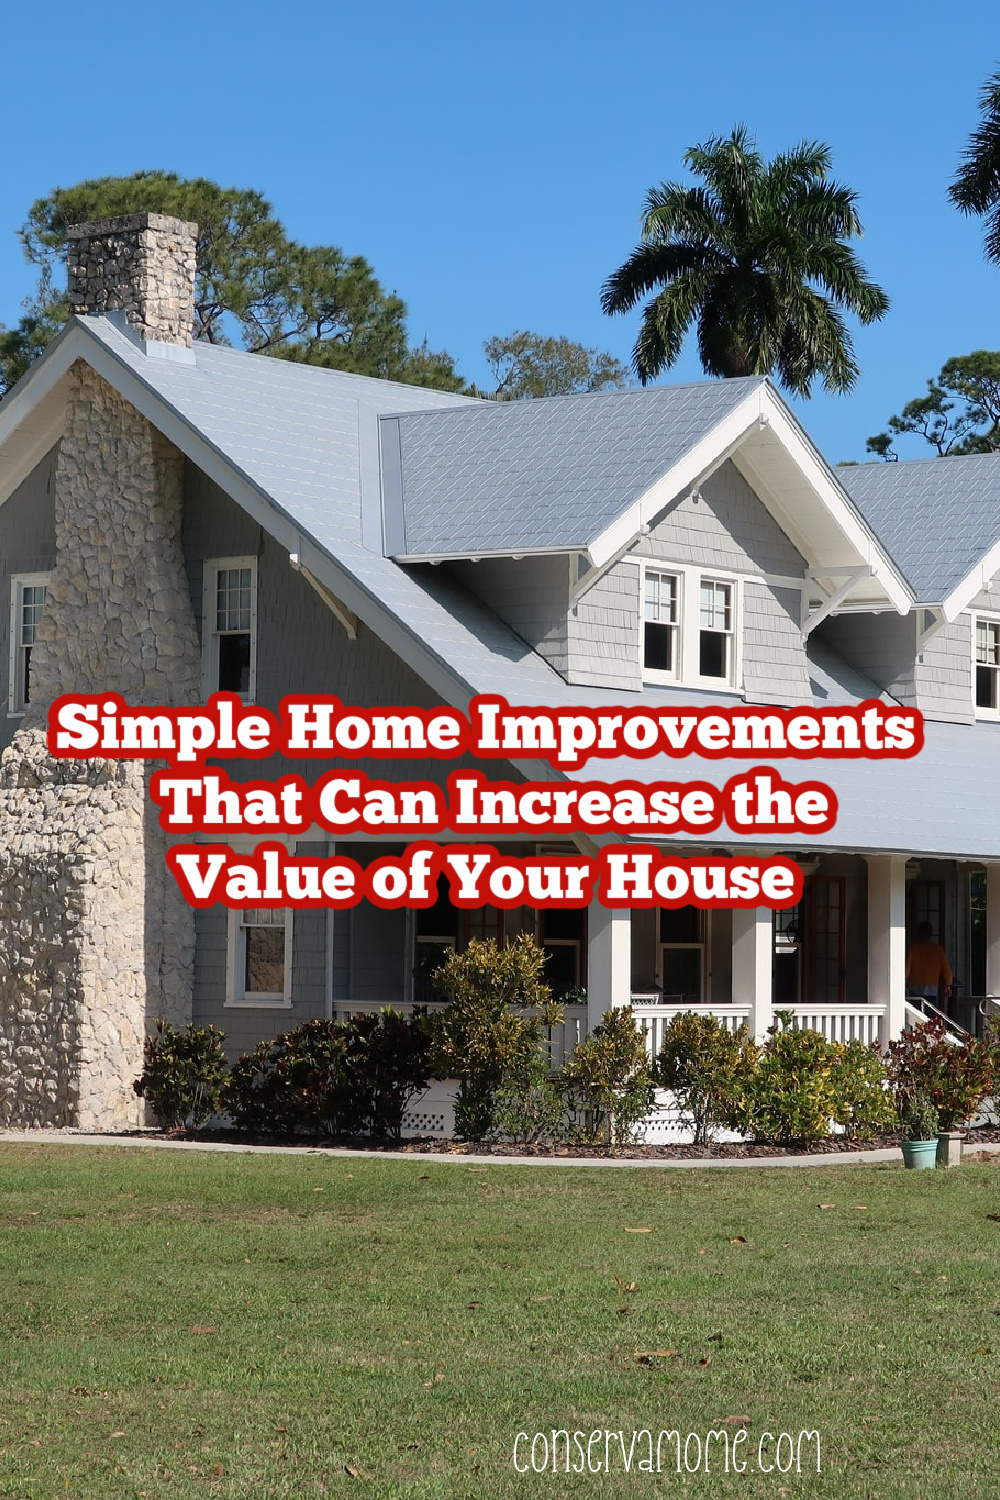 Simple Home Improvements That Can Increase the Value of Your House